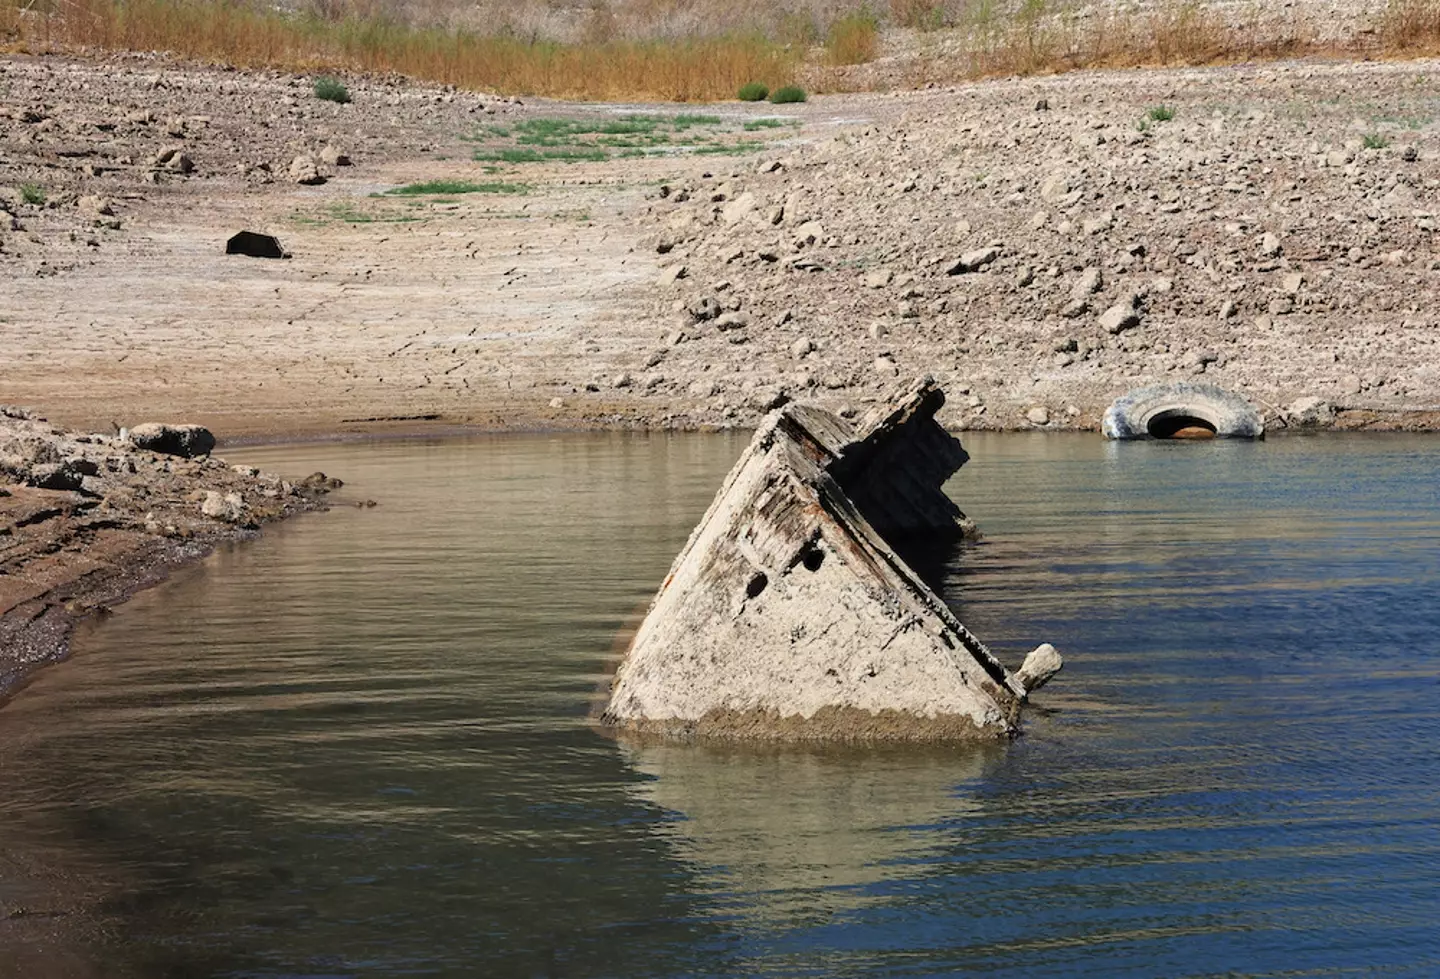 The landing craft is just one of many discoveries as the reservoir's water levels reach historic lows.